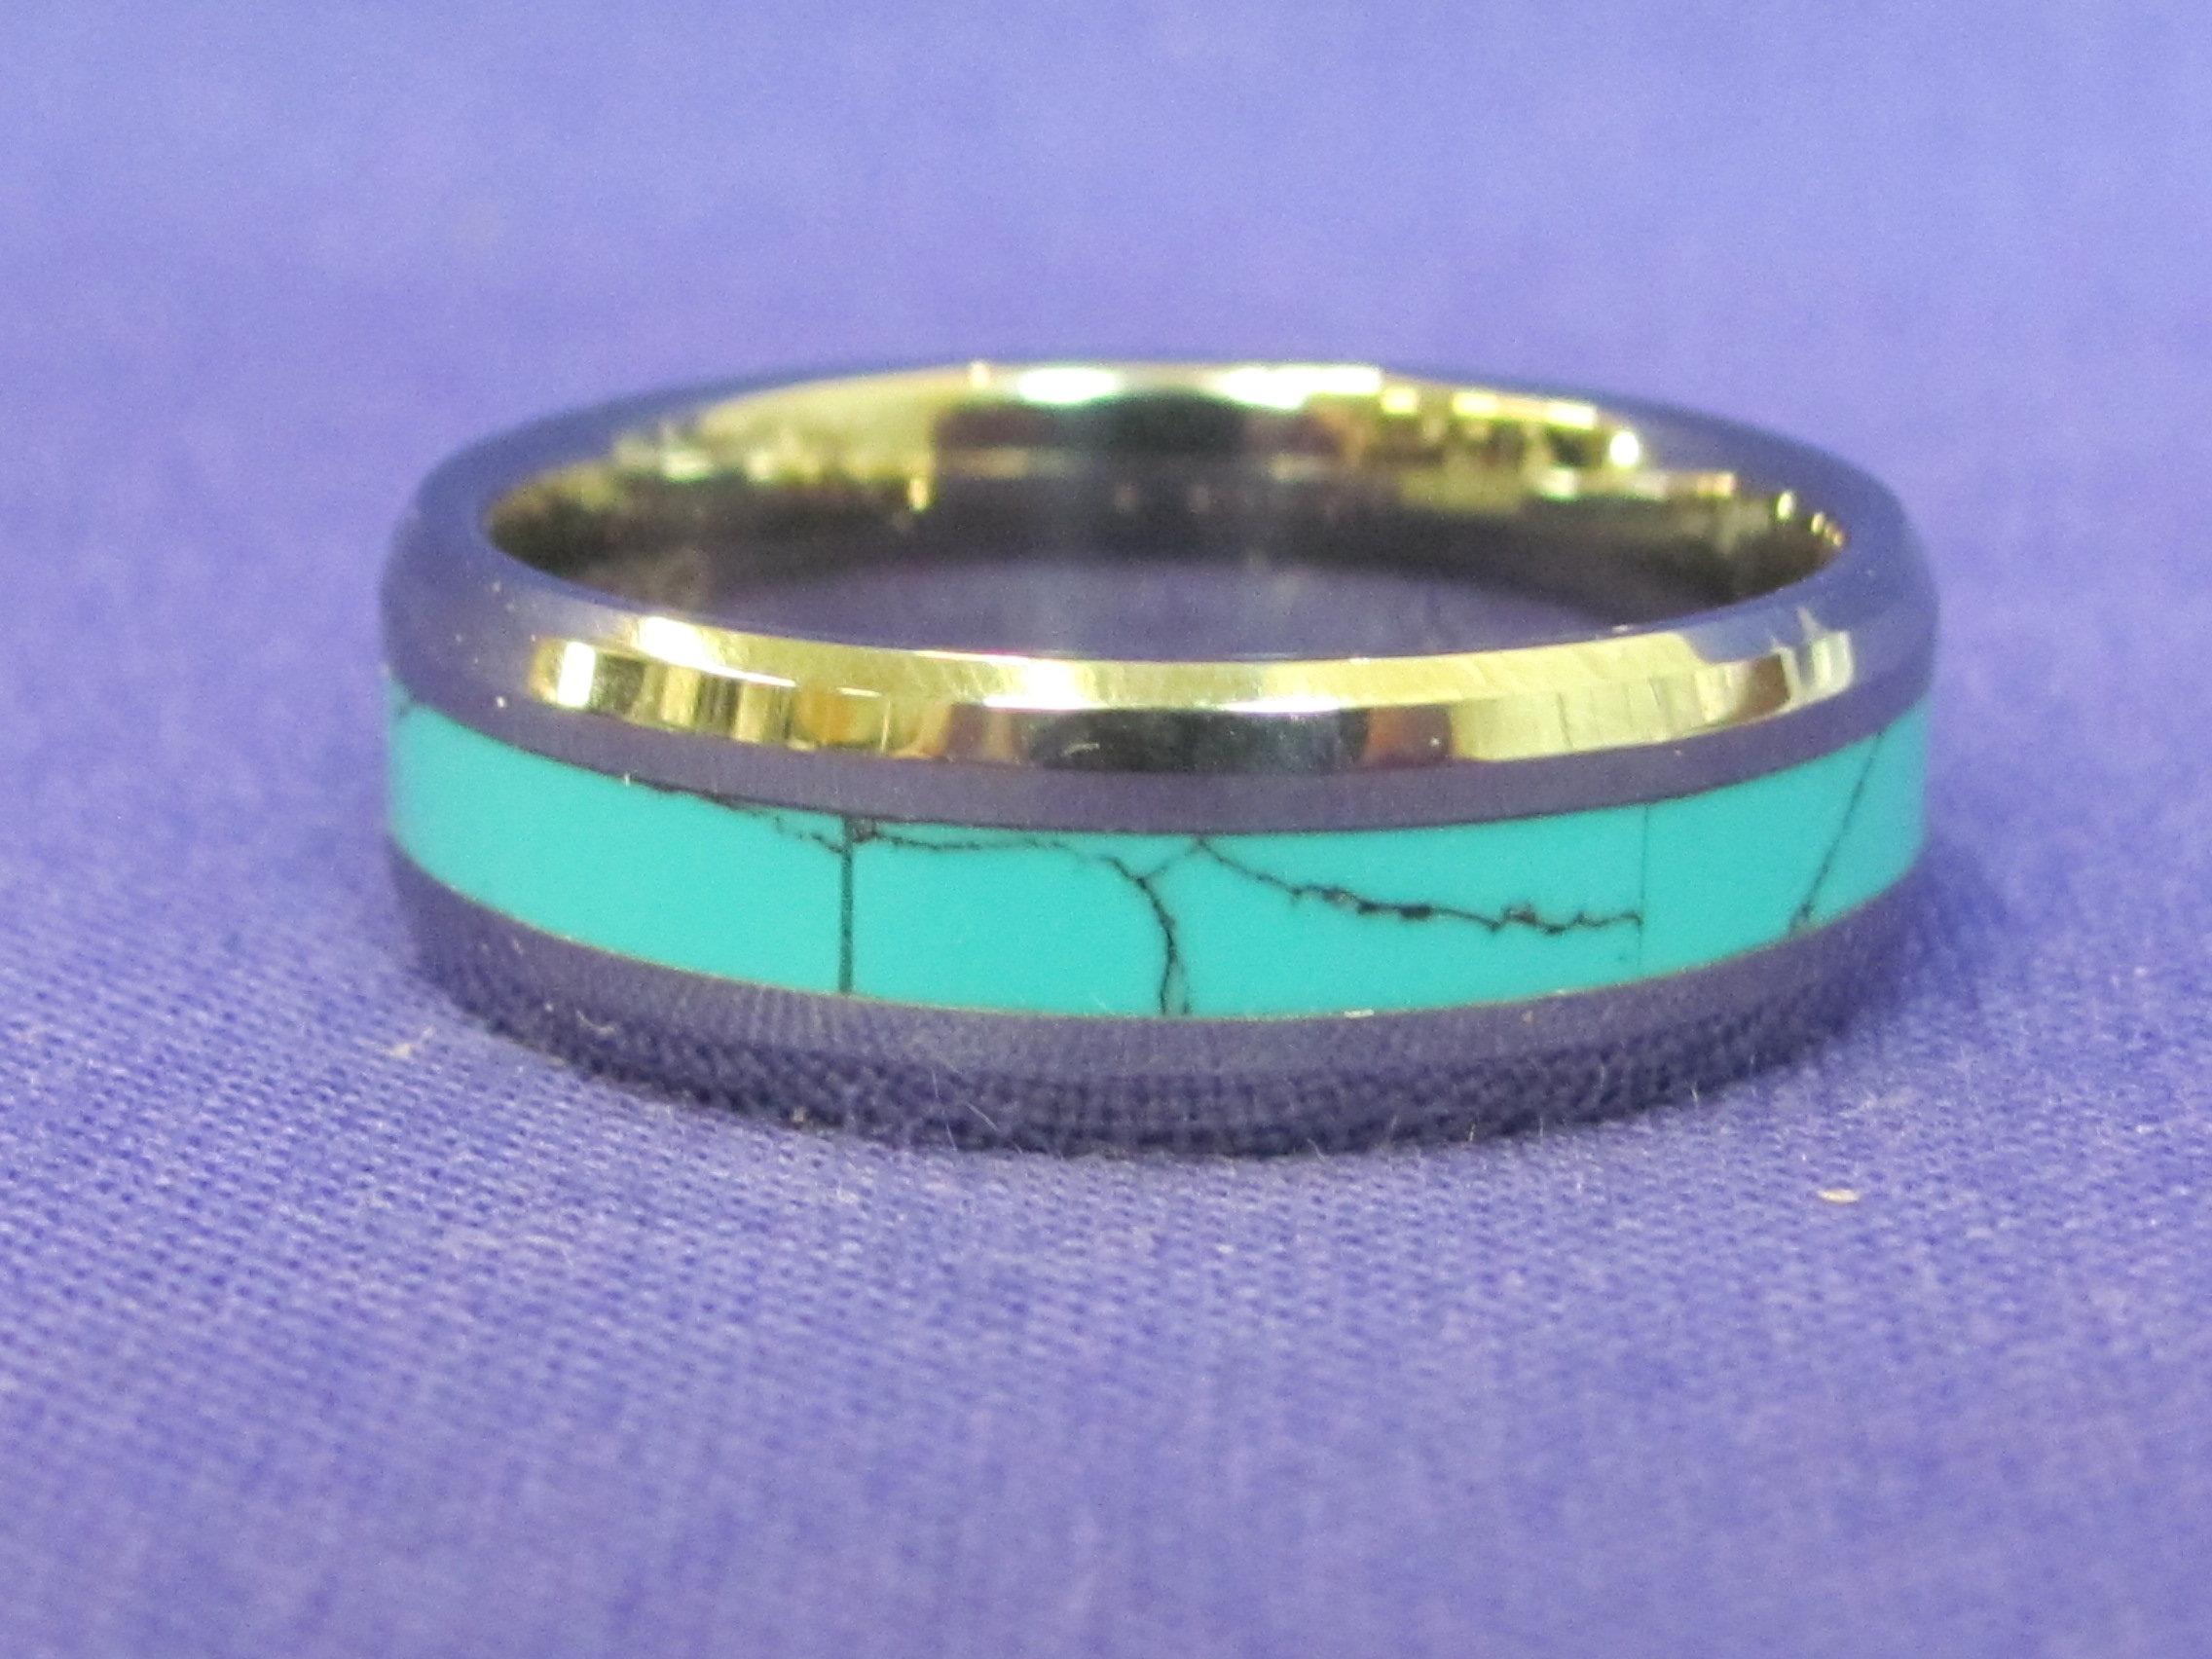 Tungsten Band Ring w Inlaid Faux Turquoise – Size 14.5 – Very good condition